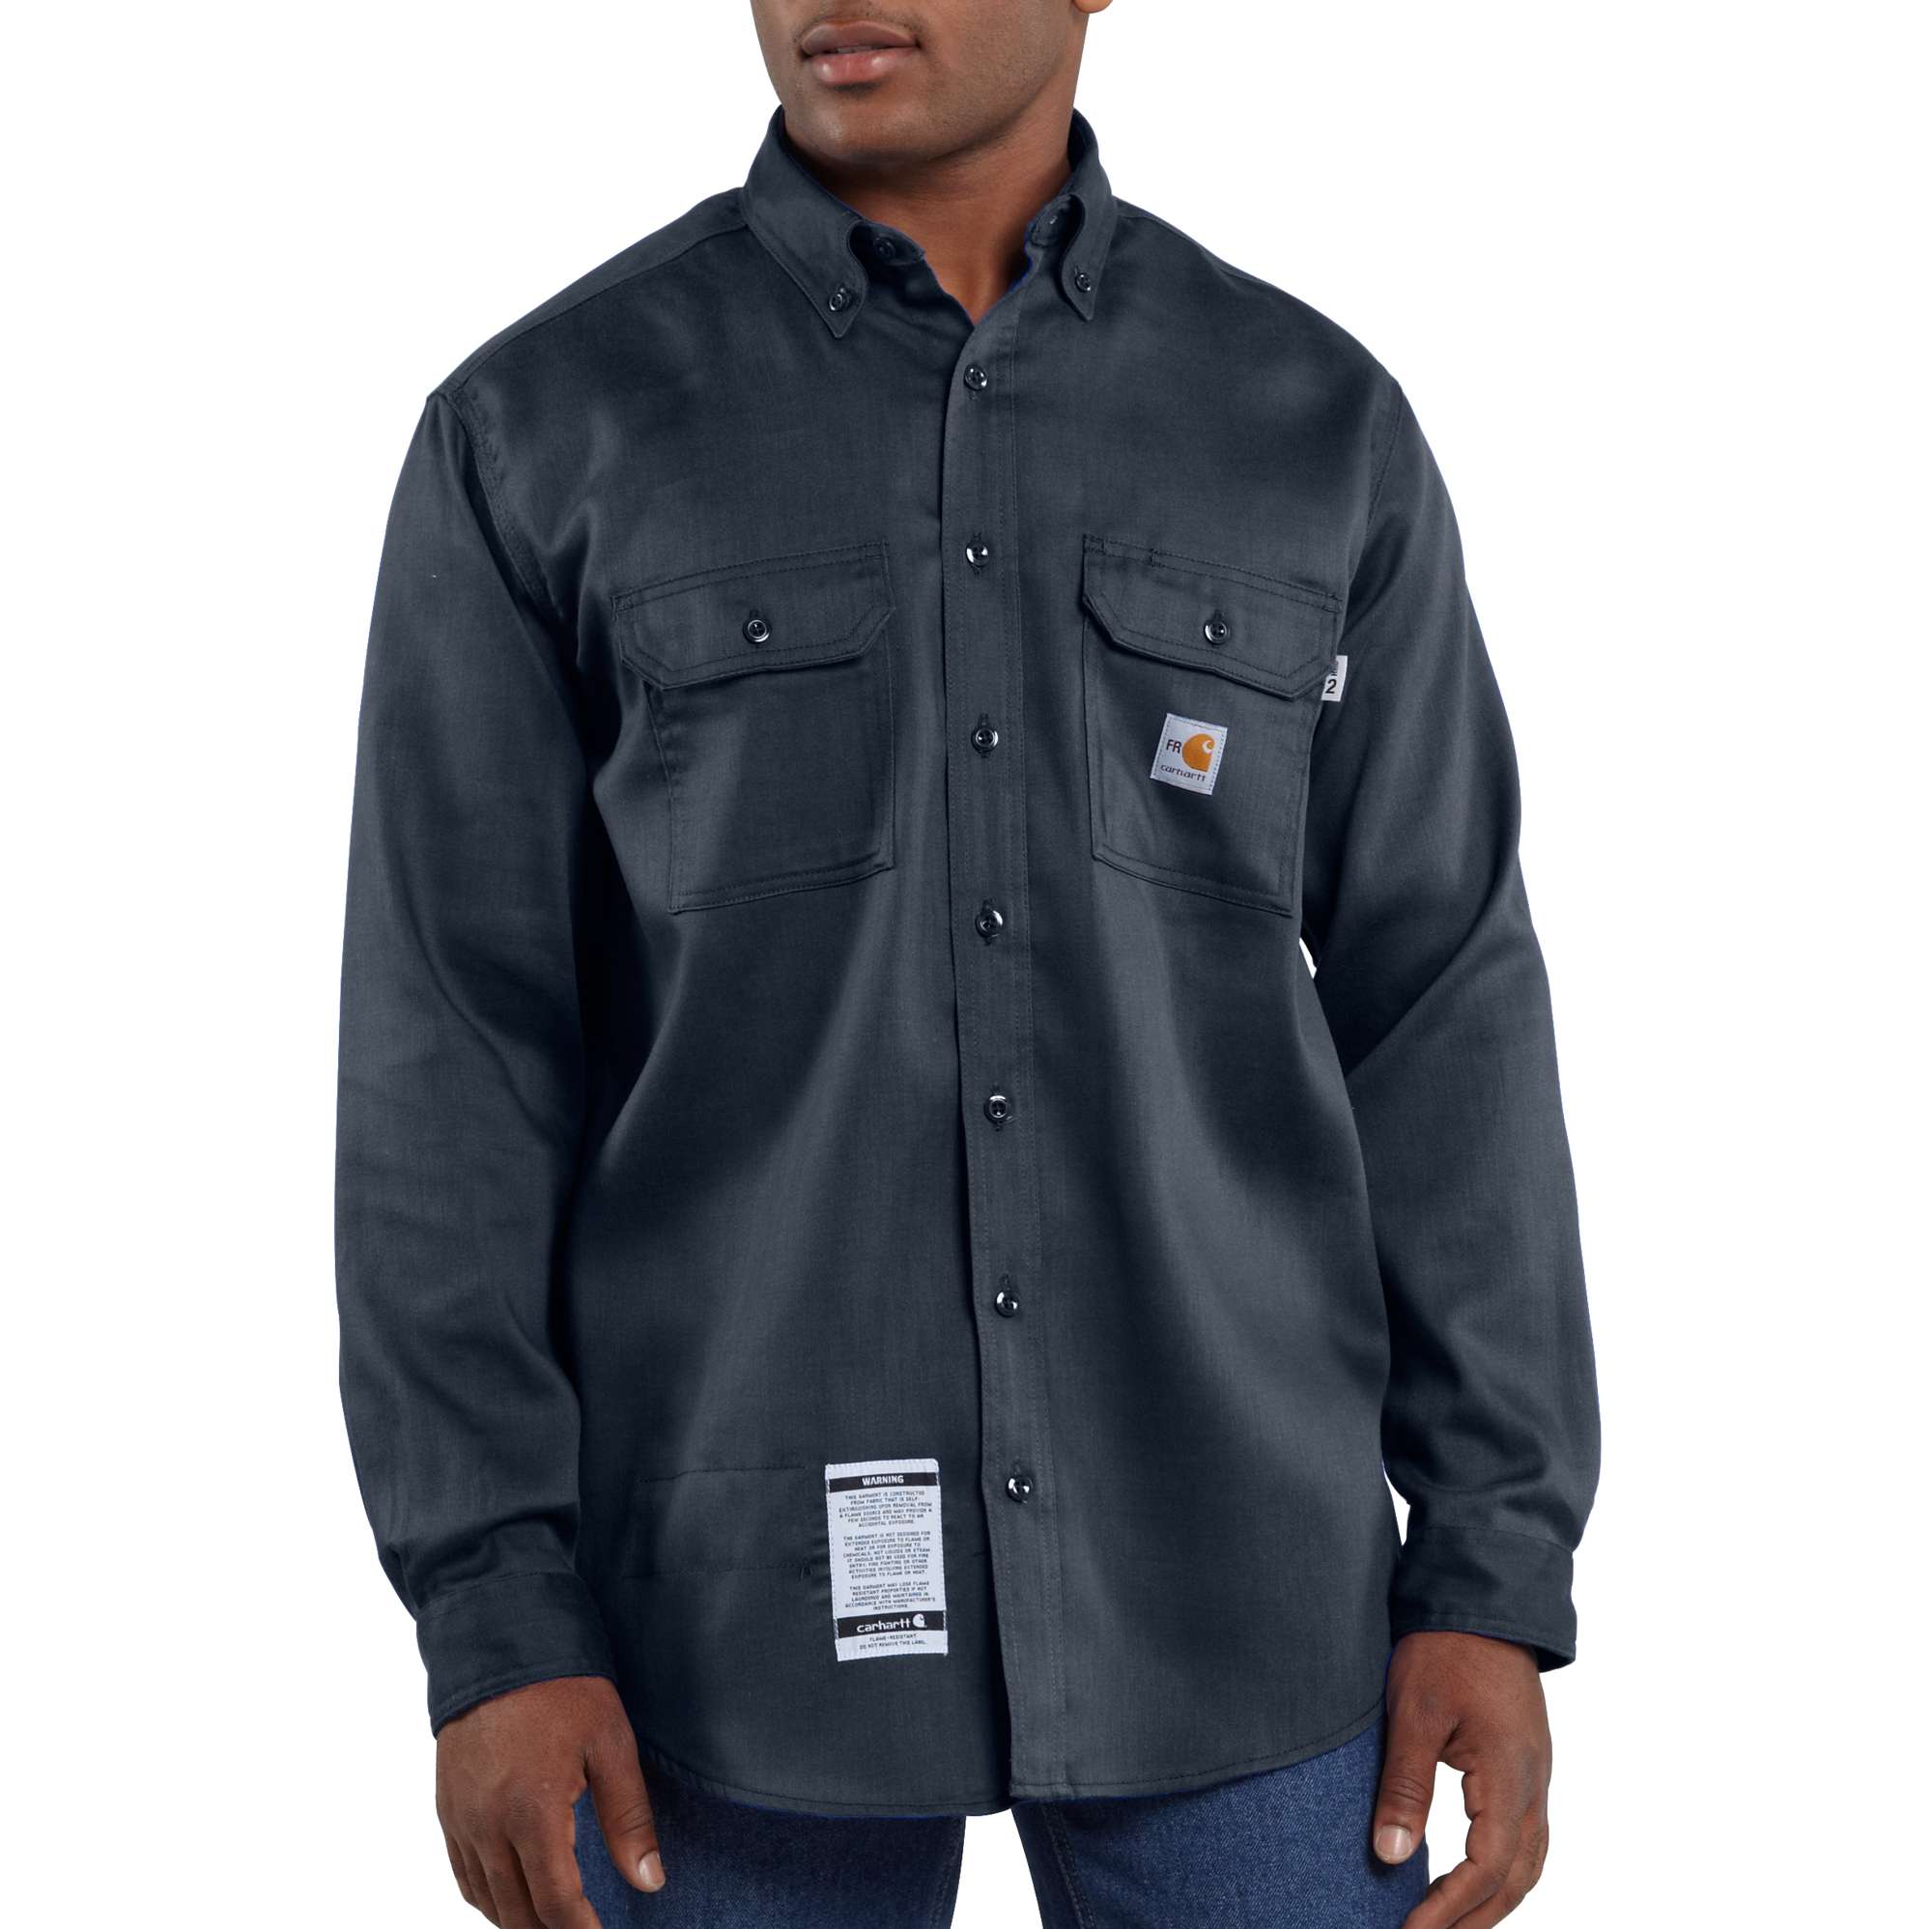 carhartt flame shirt lightweight resistant twill sleeve shirts tradesman amaril rated tractor supply mens dungarees tsc wishlist